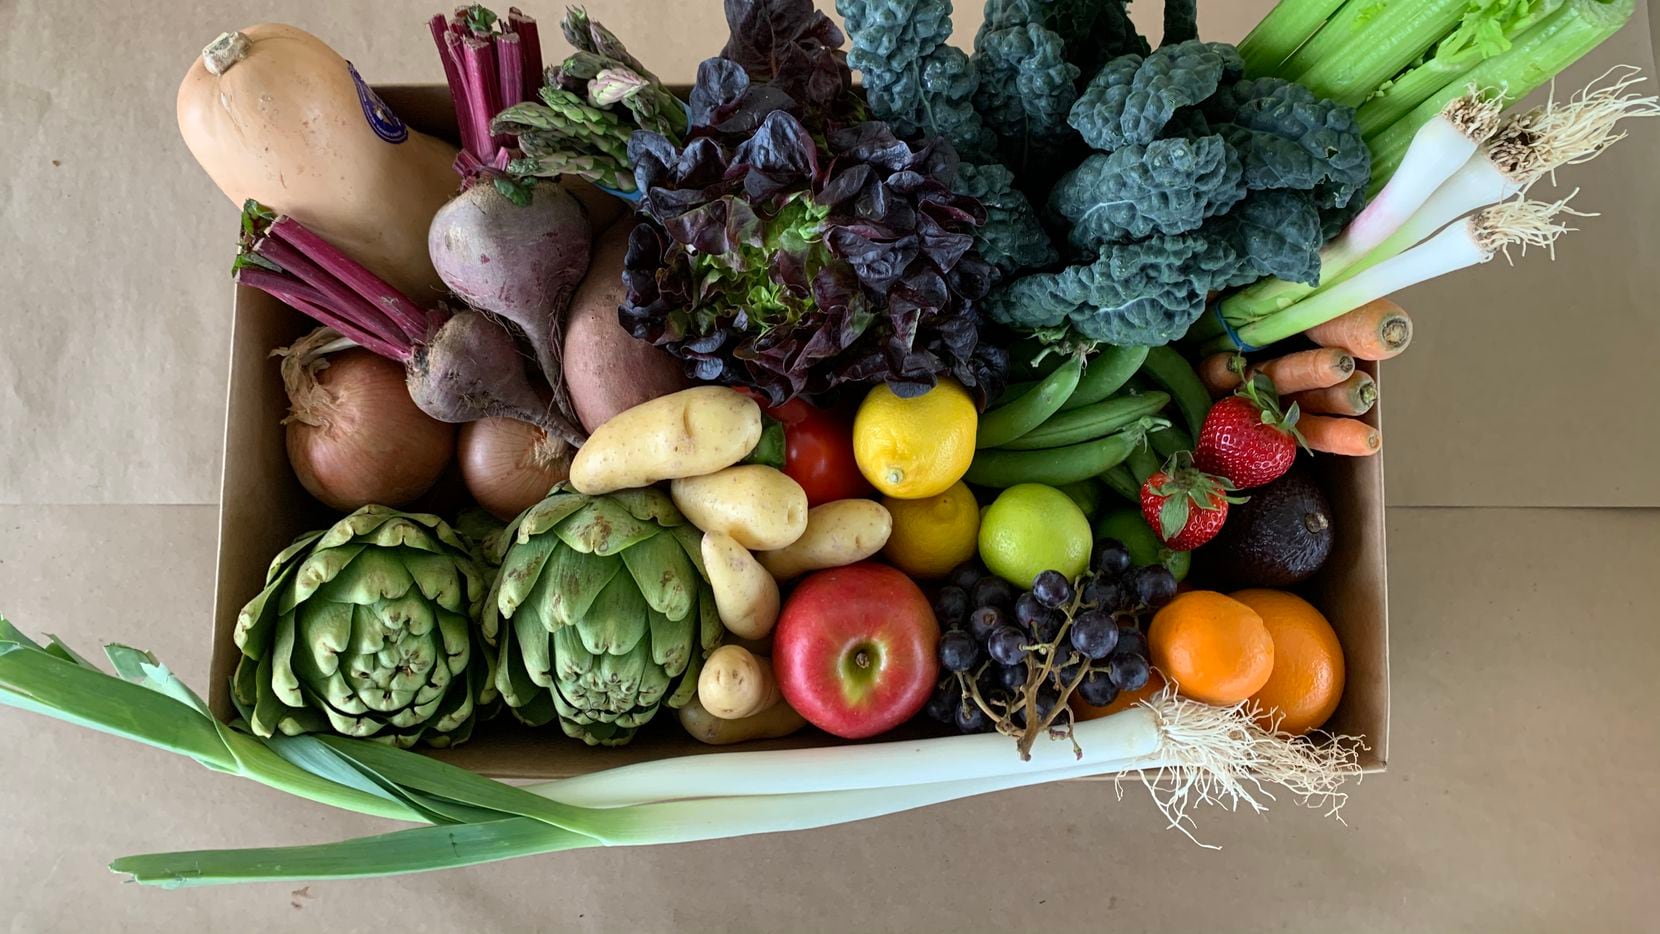 Dallas Food Wholesalers Are Now Selling Retail Produce Boxes To